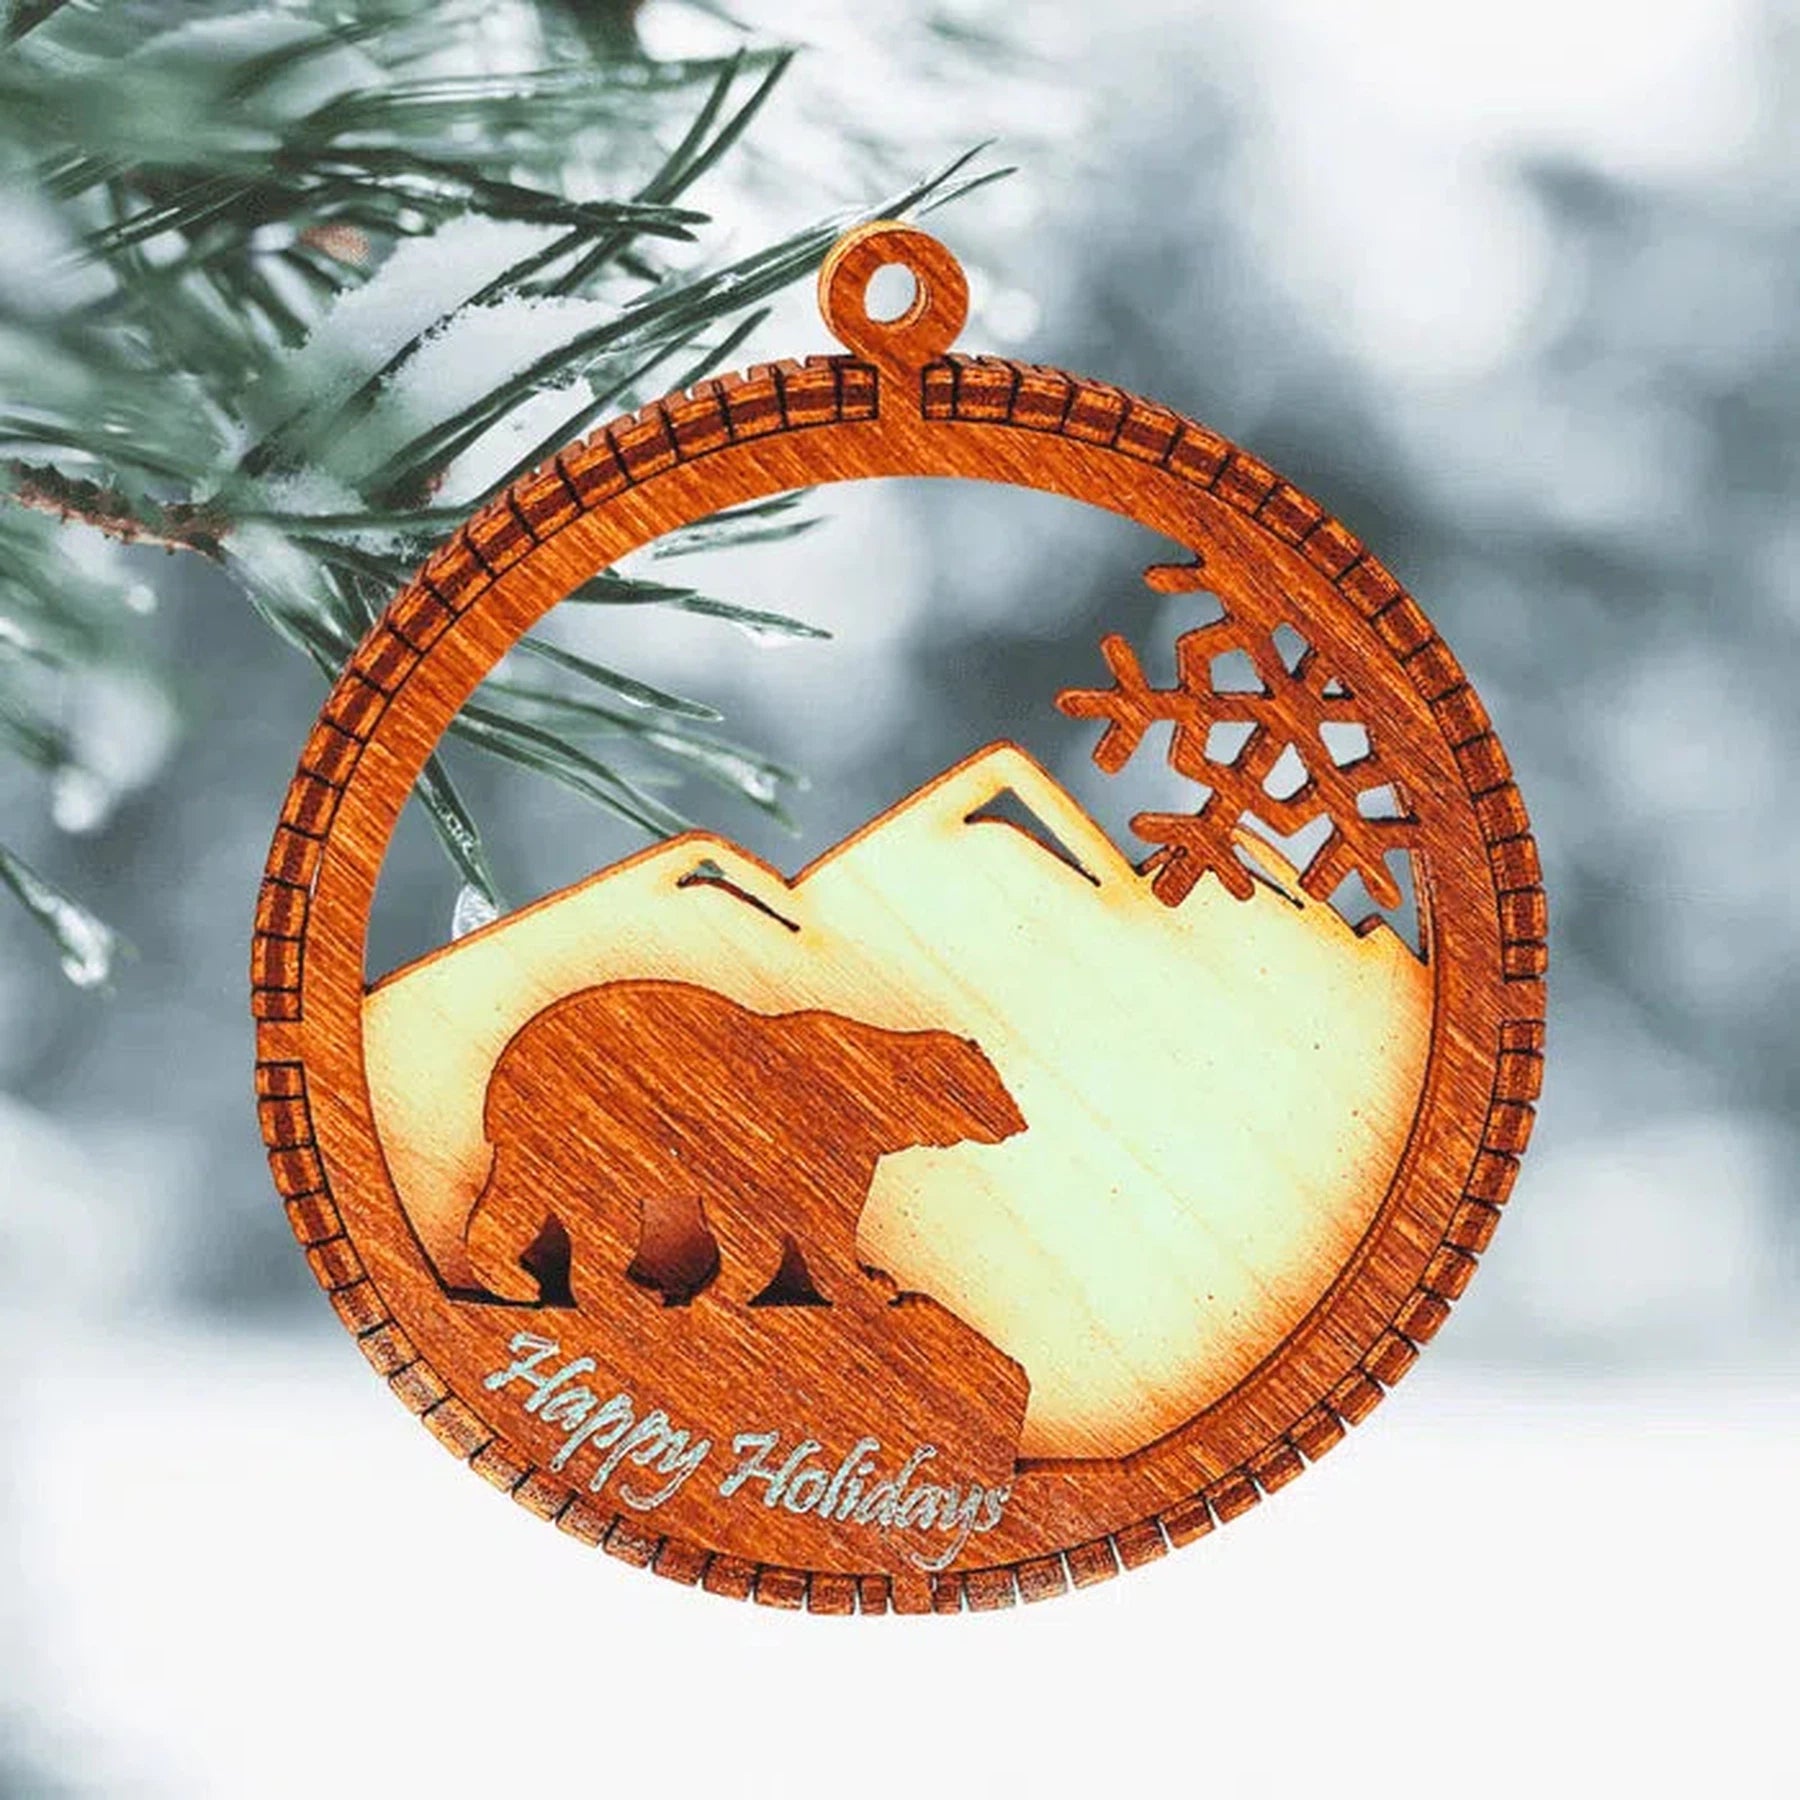 Natural Birch Wood Hand-Made Shadow Box Ornaments (Personalization Included)